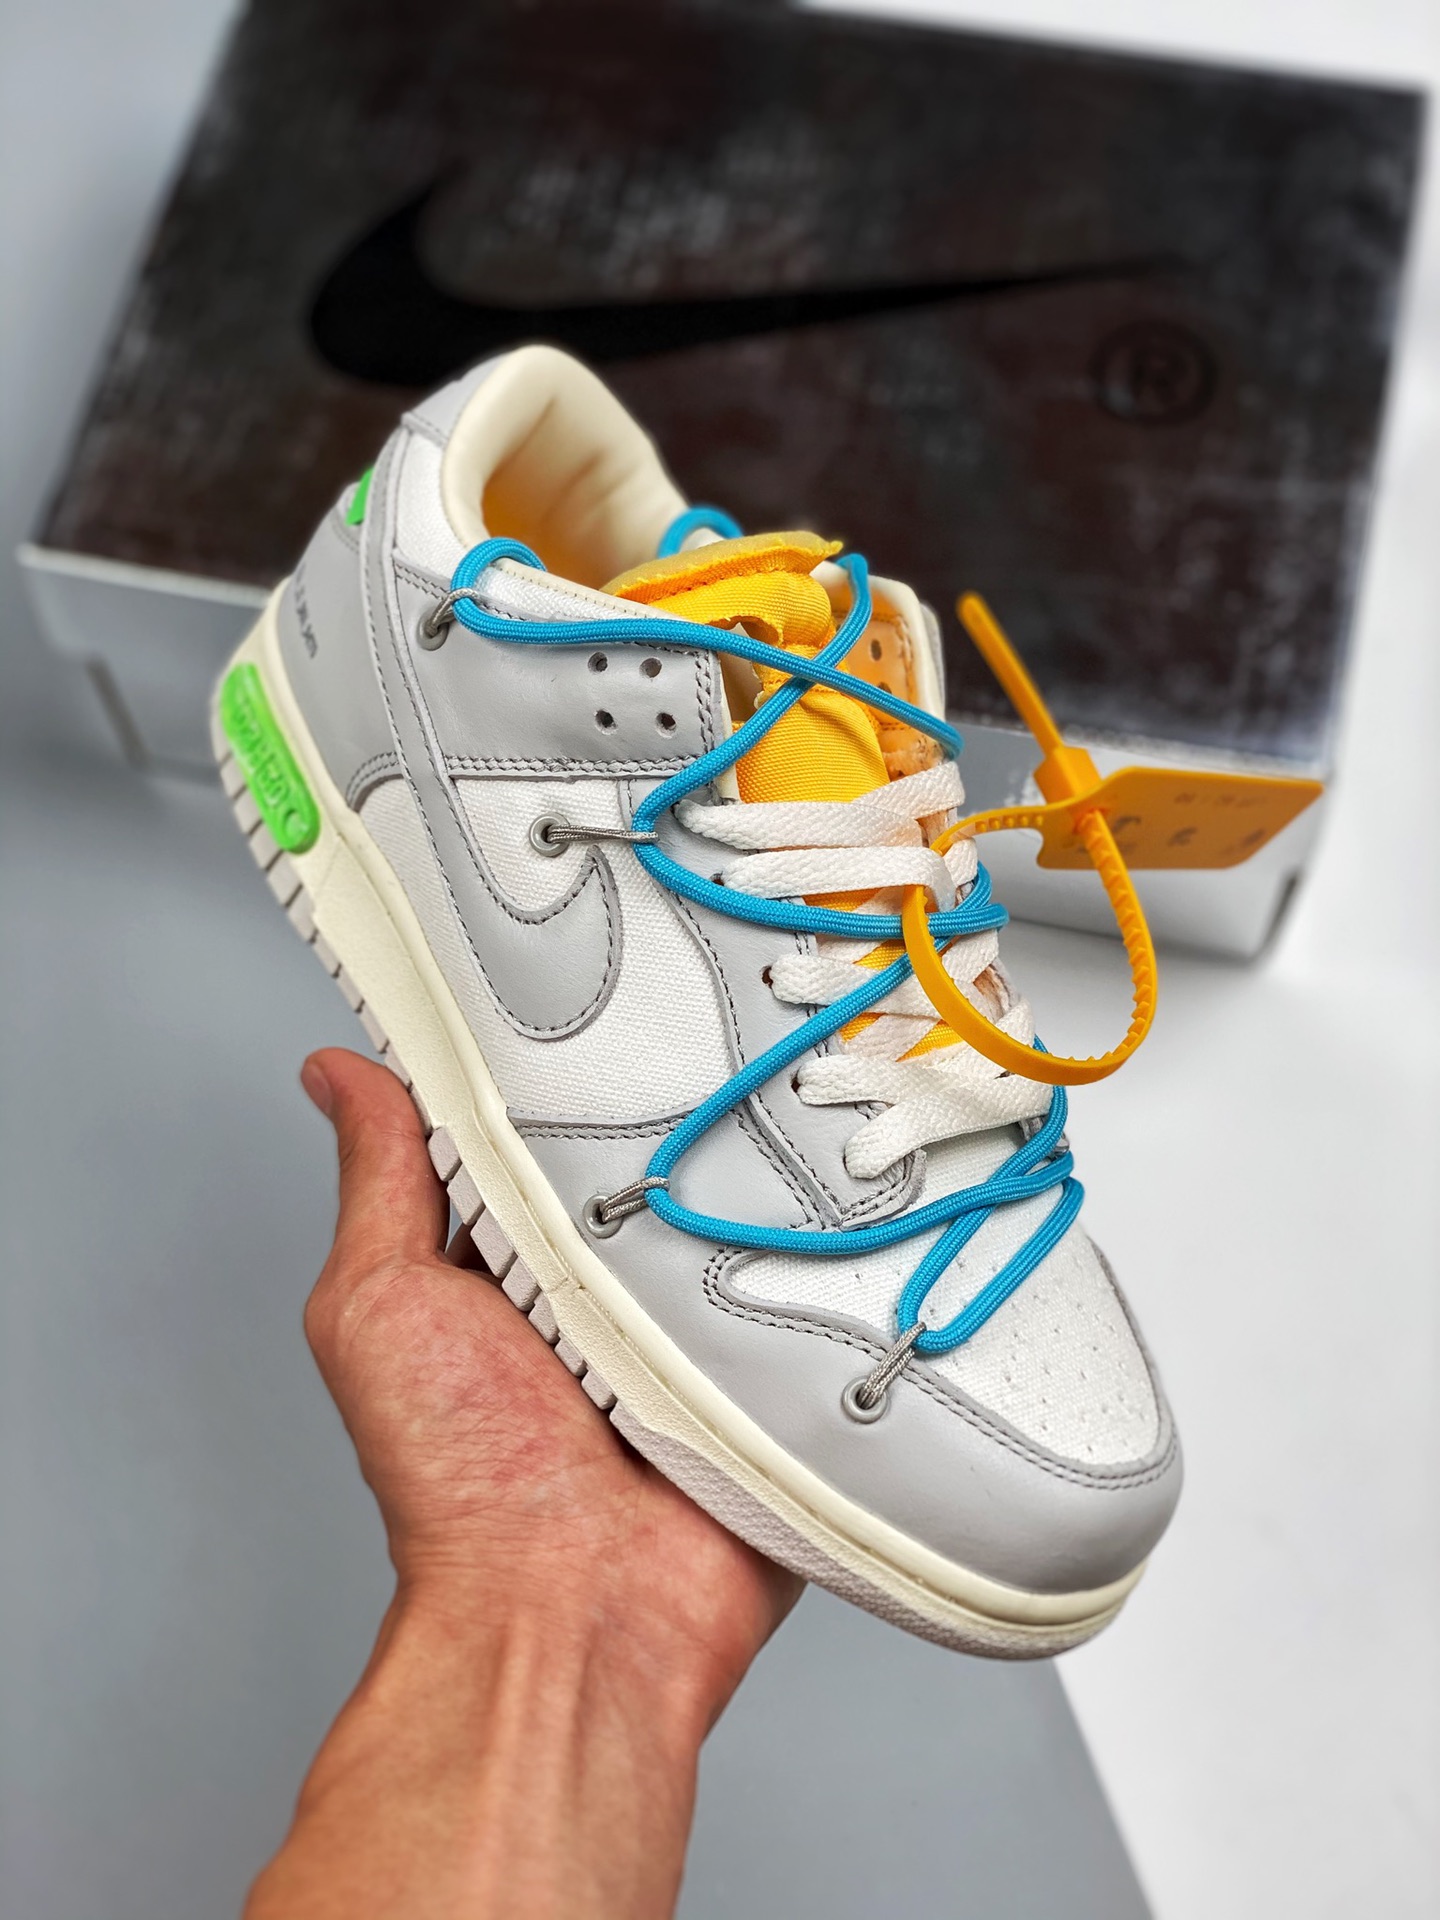 Off-White x Nike Dunk Low "02 of 50" Sail Grey Yellow Shoes